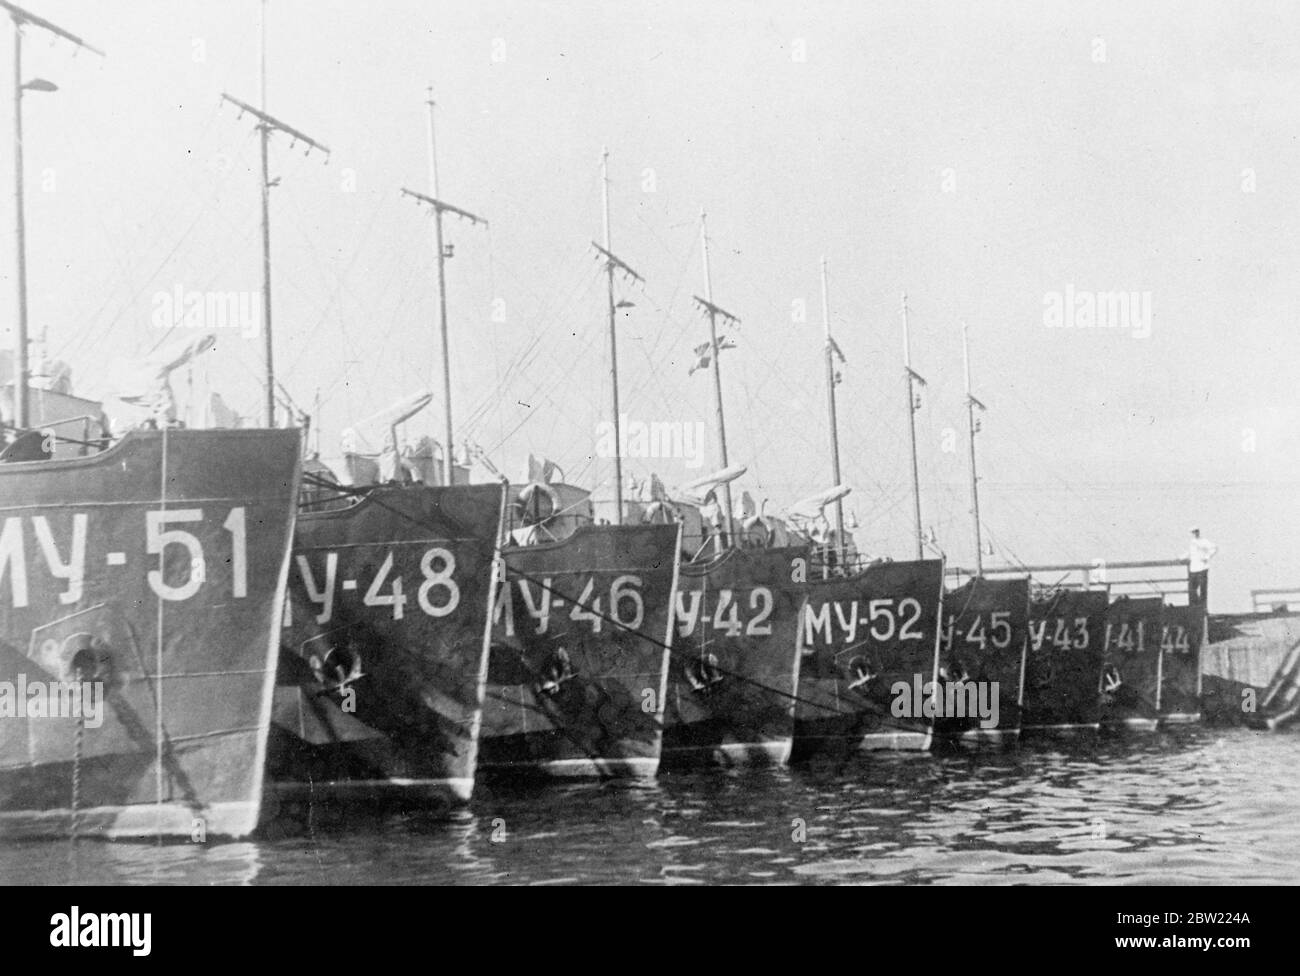 Training ships of the Leningrad military Marine school, Russia is pushing ahead with her training the naval recruits. These youths picked from factories of the Soviet Union, are put through an intense course on Soviet warships in the Baltic. Many of them will be needed to man the battleships. With a critical international situation prevailing on her far eastern seaboard and Germany aiming the control of the Baltic. 12 September 1937 Stock Photo